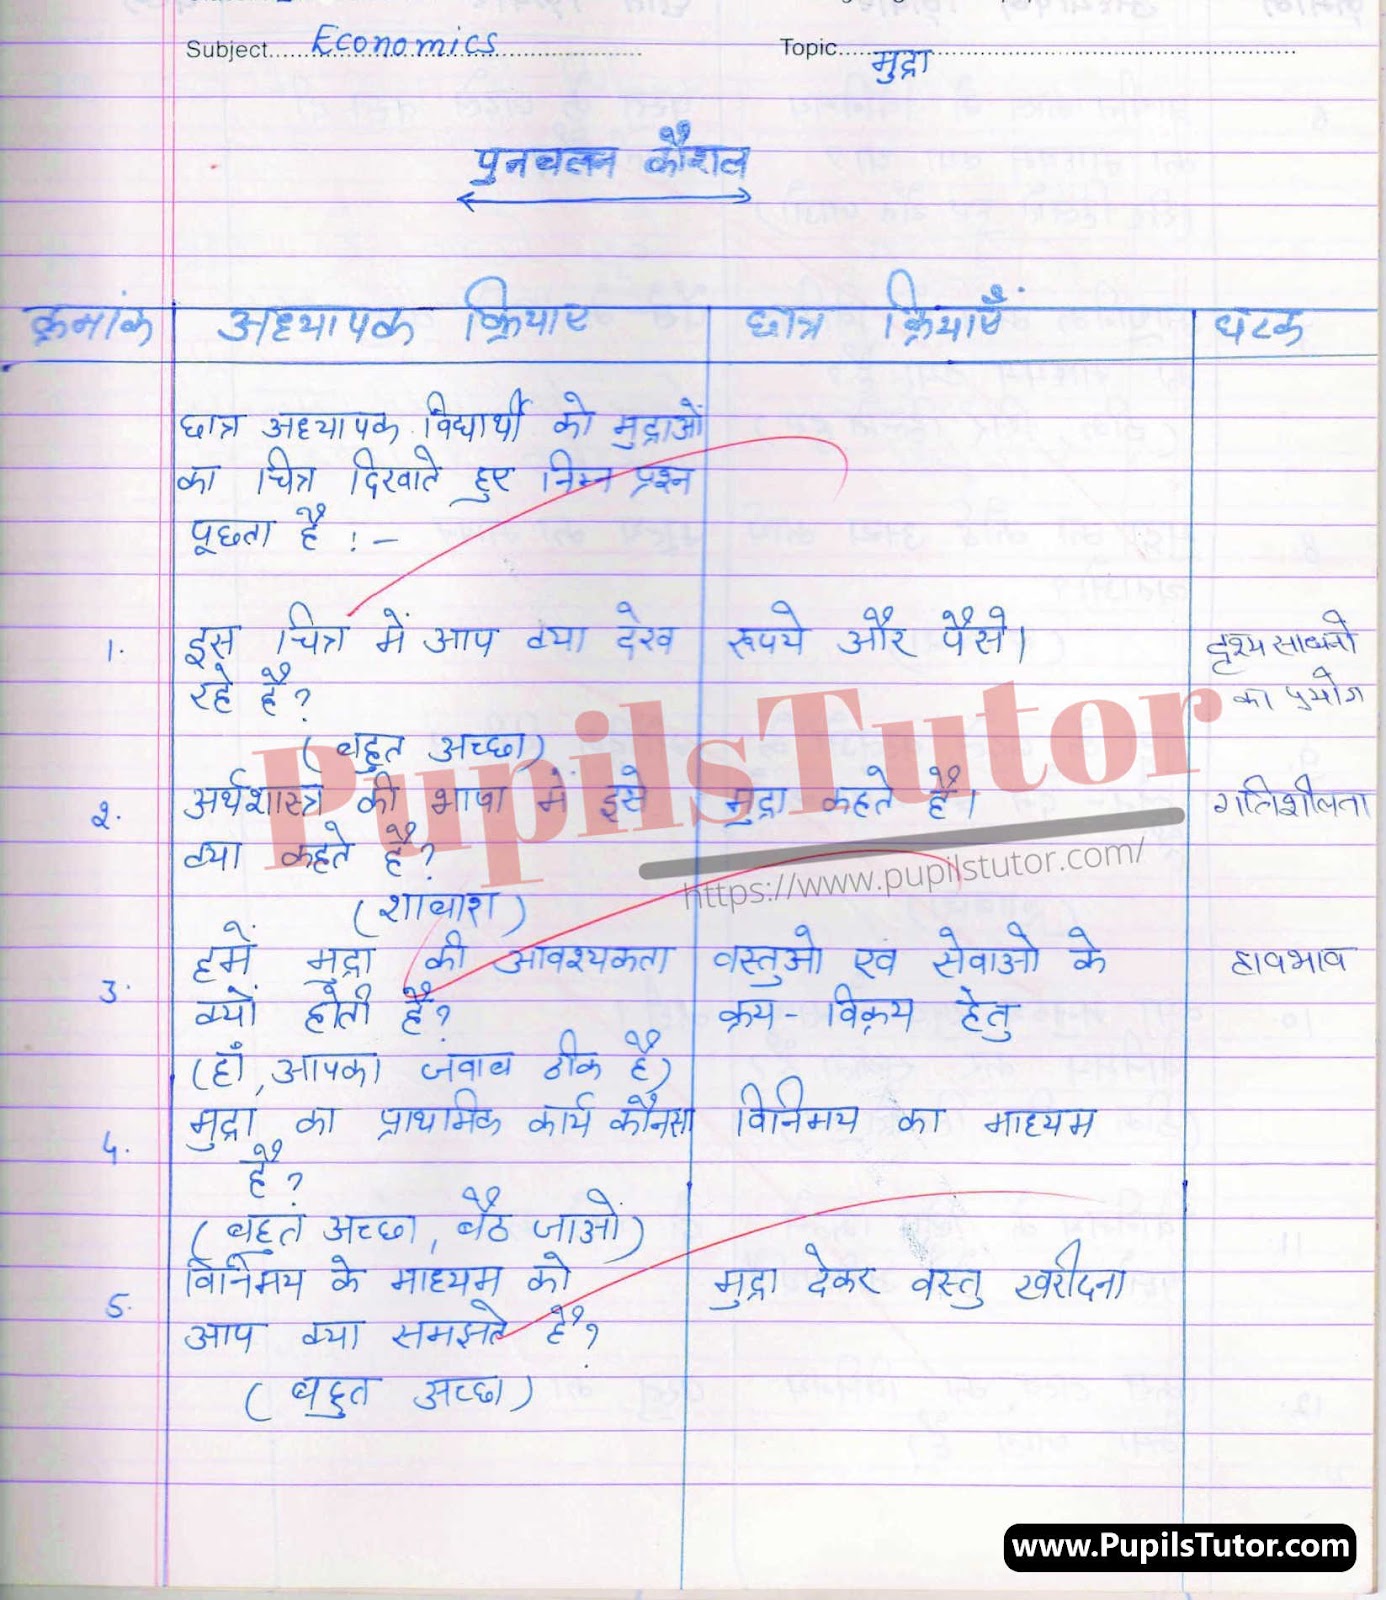 Mudra Lesson Plan | Money Lesson Plan In Hindi For Class 10th, 11th, 12 – (Page And Image Number 1) – Pupils Tutor